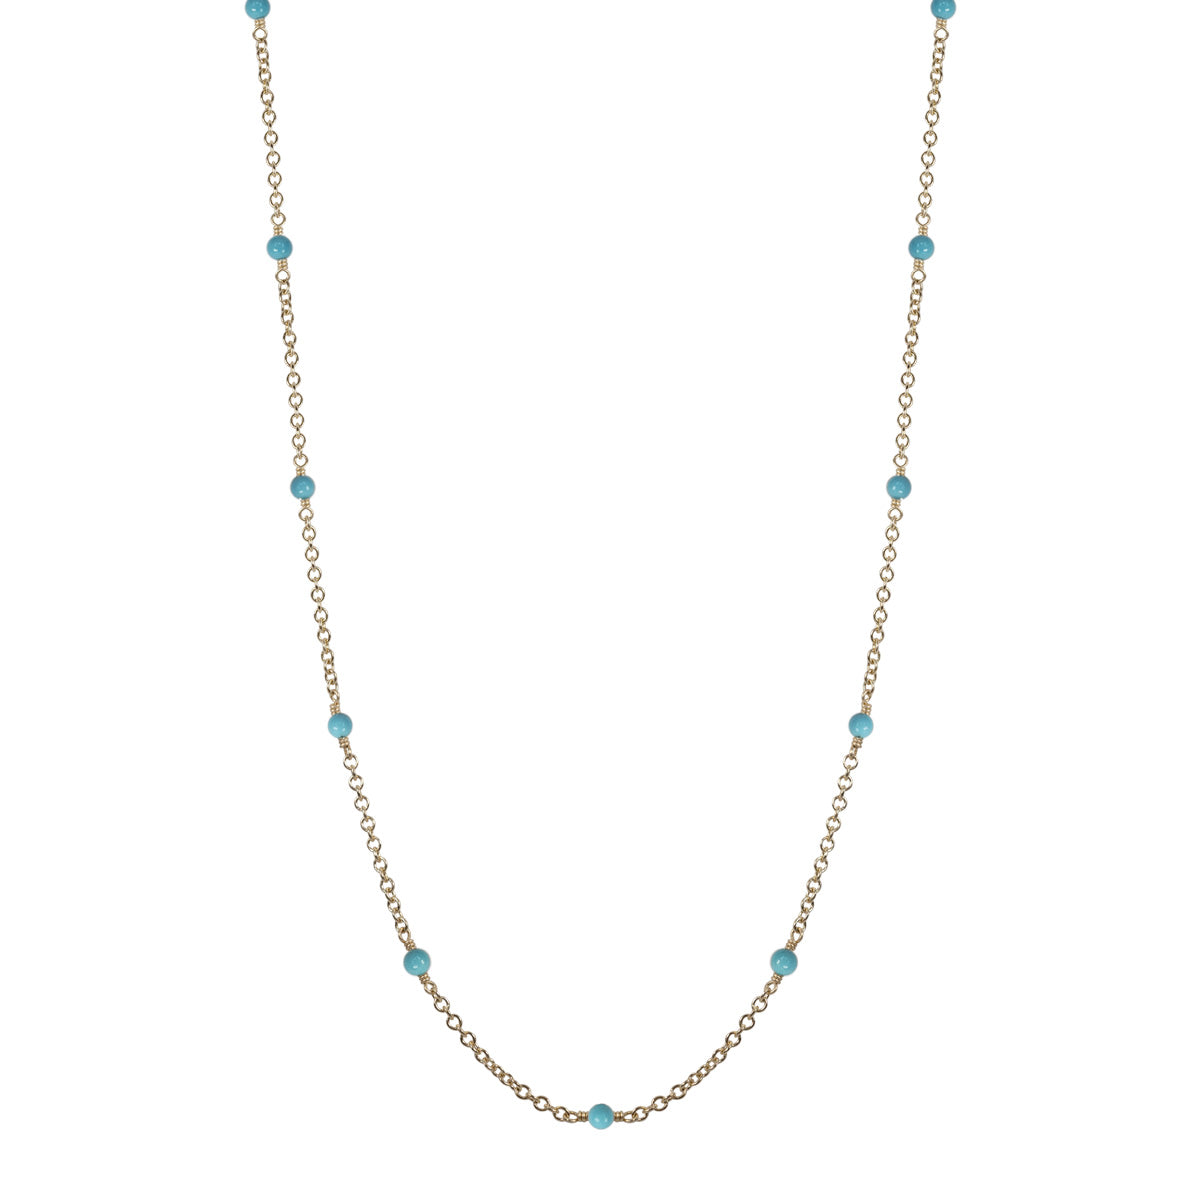 10K Gold Simple Beaded Chain with Turquoise